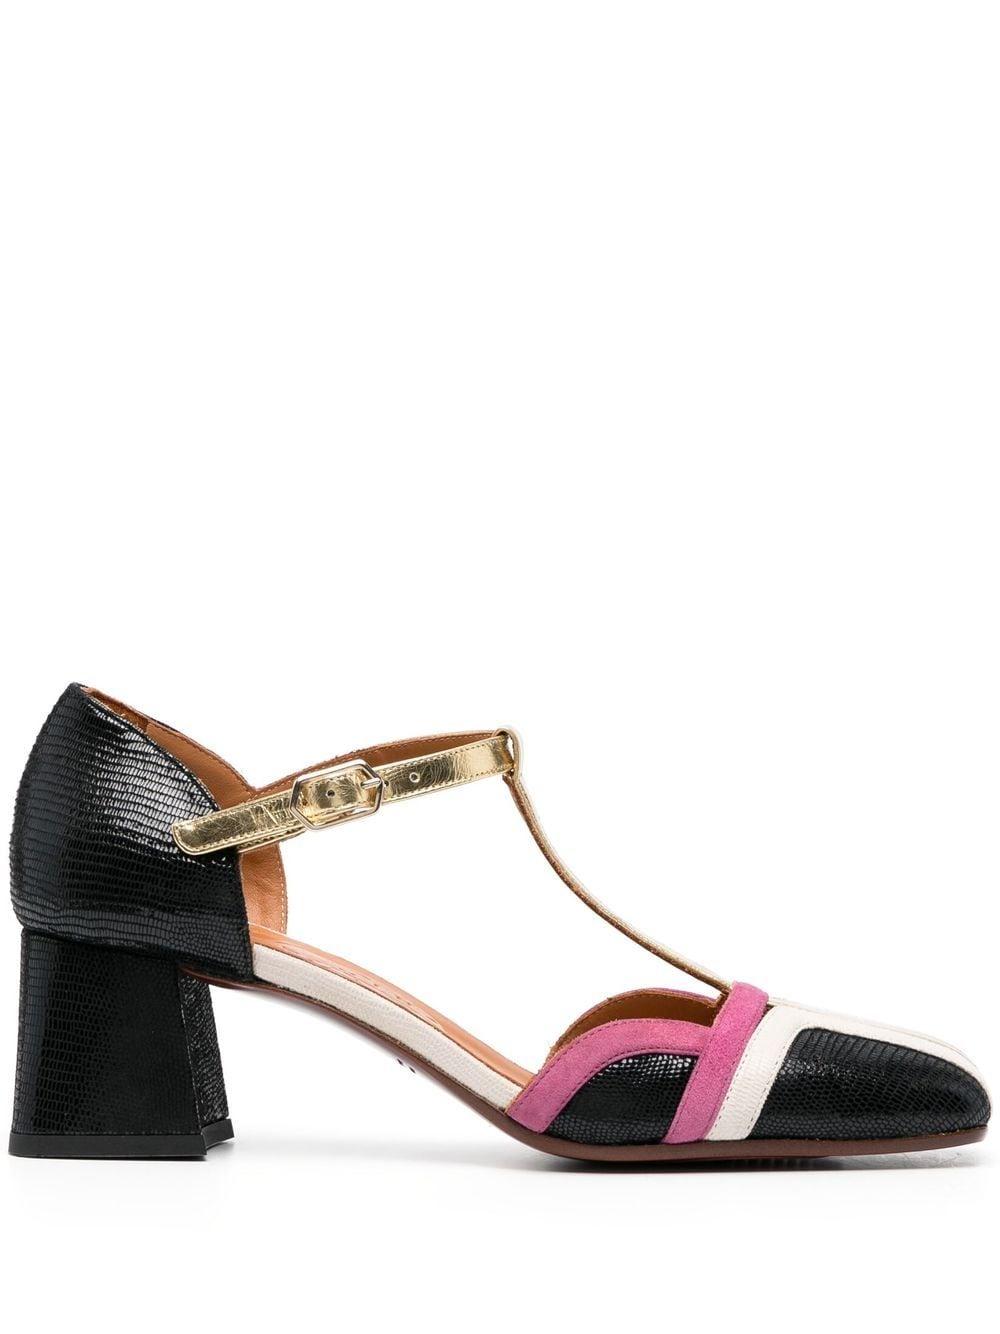 Chie Mihara T-bar Leather Pumps in Pink | Lyst